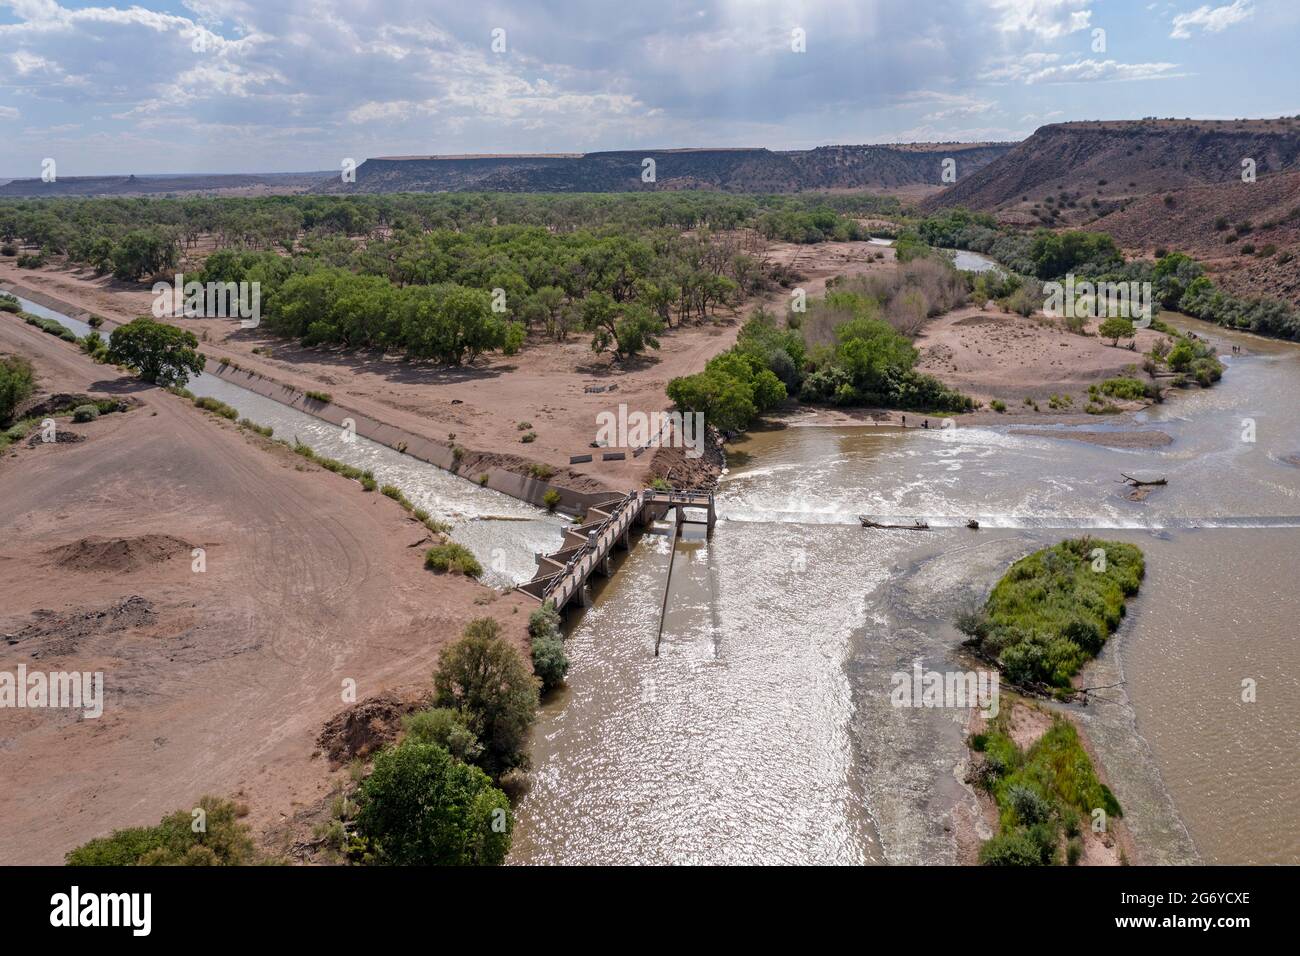 Algodones, New Mexico - The Angostura Diversion dam sends water from the Rio Grande into irrigation canals. Much of the state is experiencing extreme Stock Photo